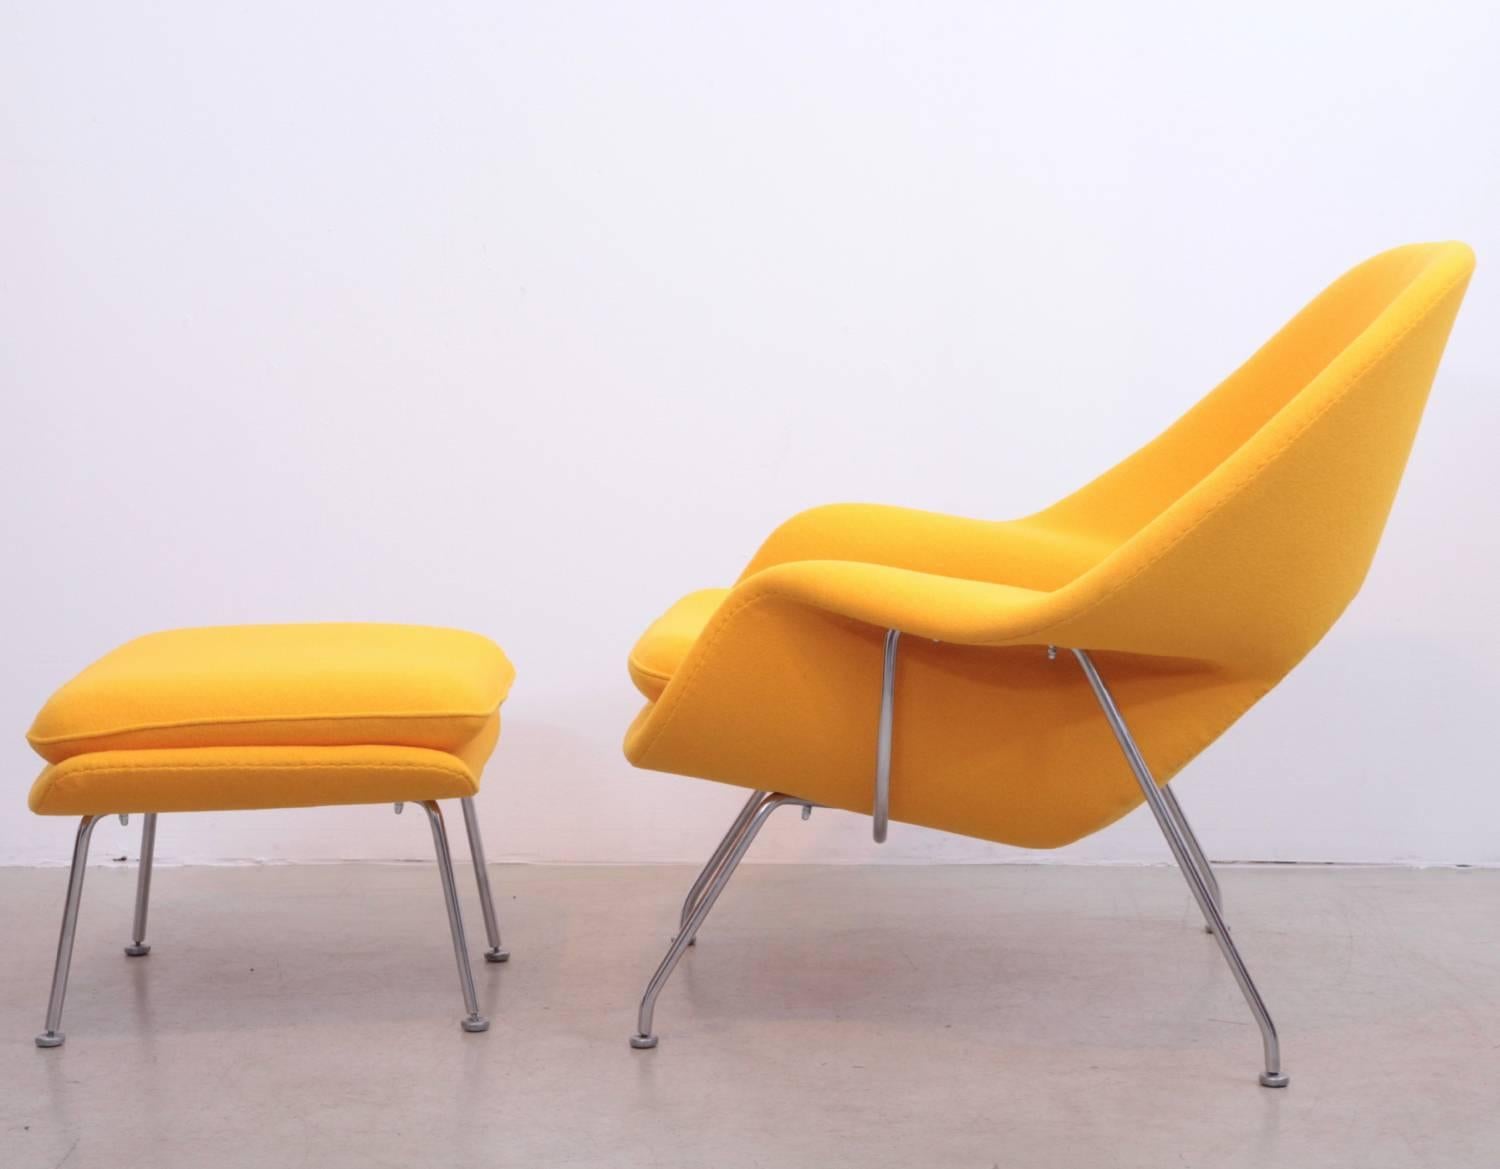 Newly upholstered Knoll Womb chair in Kvadrat fabric, 1960s production.

*This piece is curated by Original in Berlin*